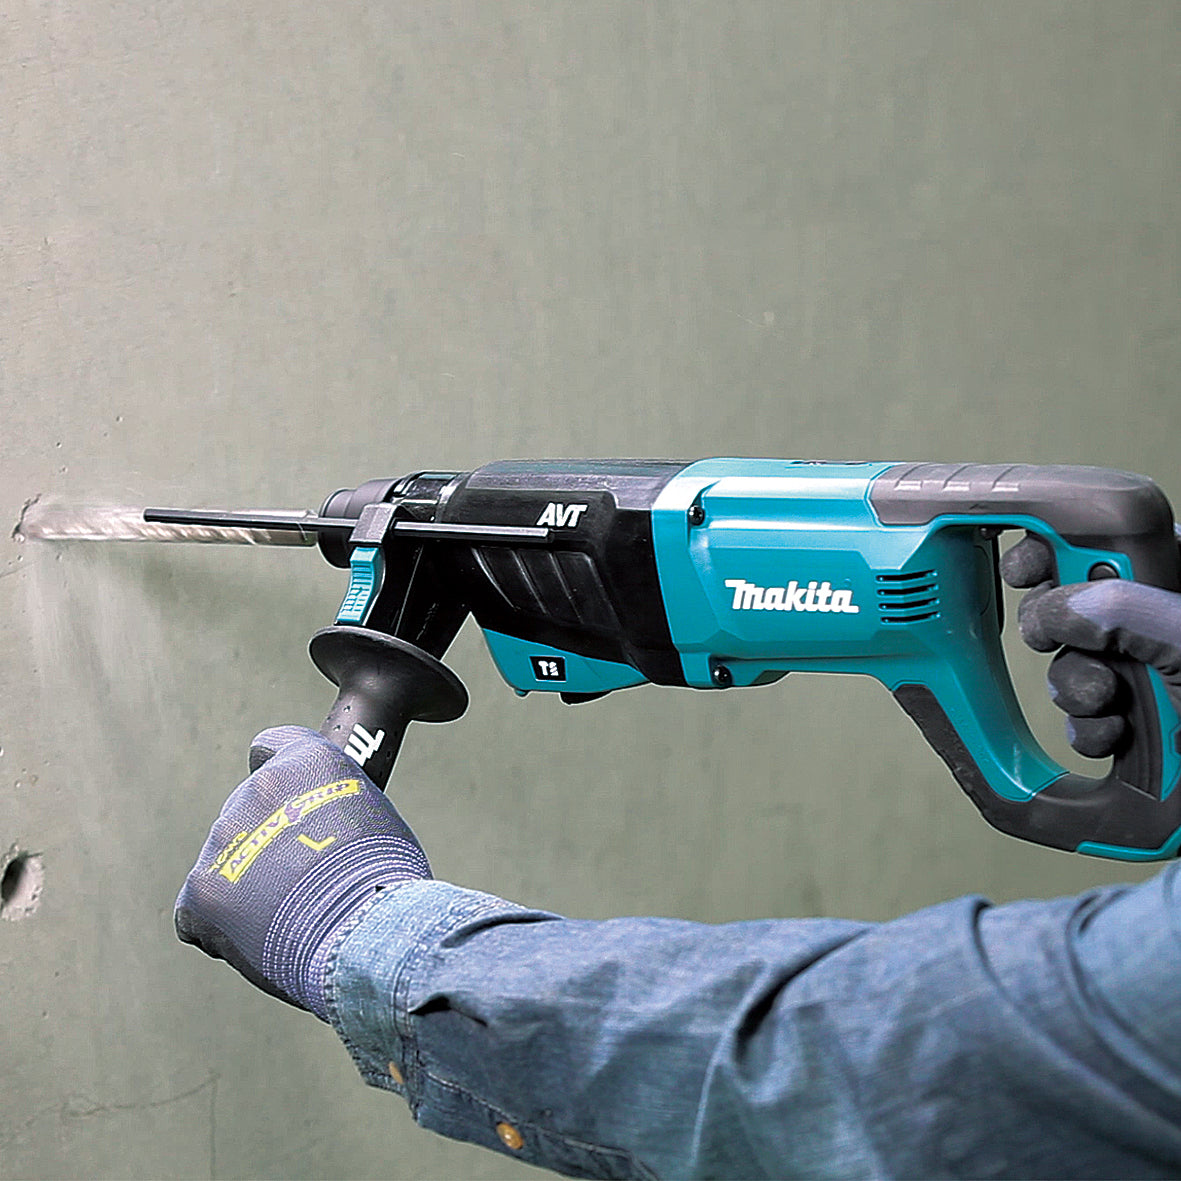 800W 26mm SDS-Plus Rotary Hammer HR2641 by Makita